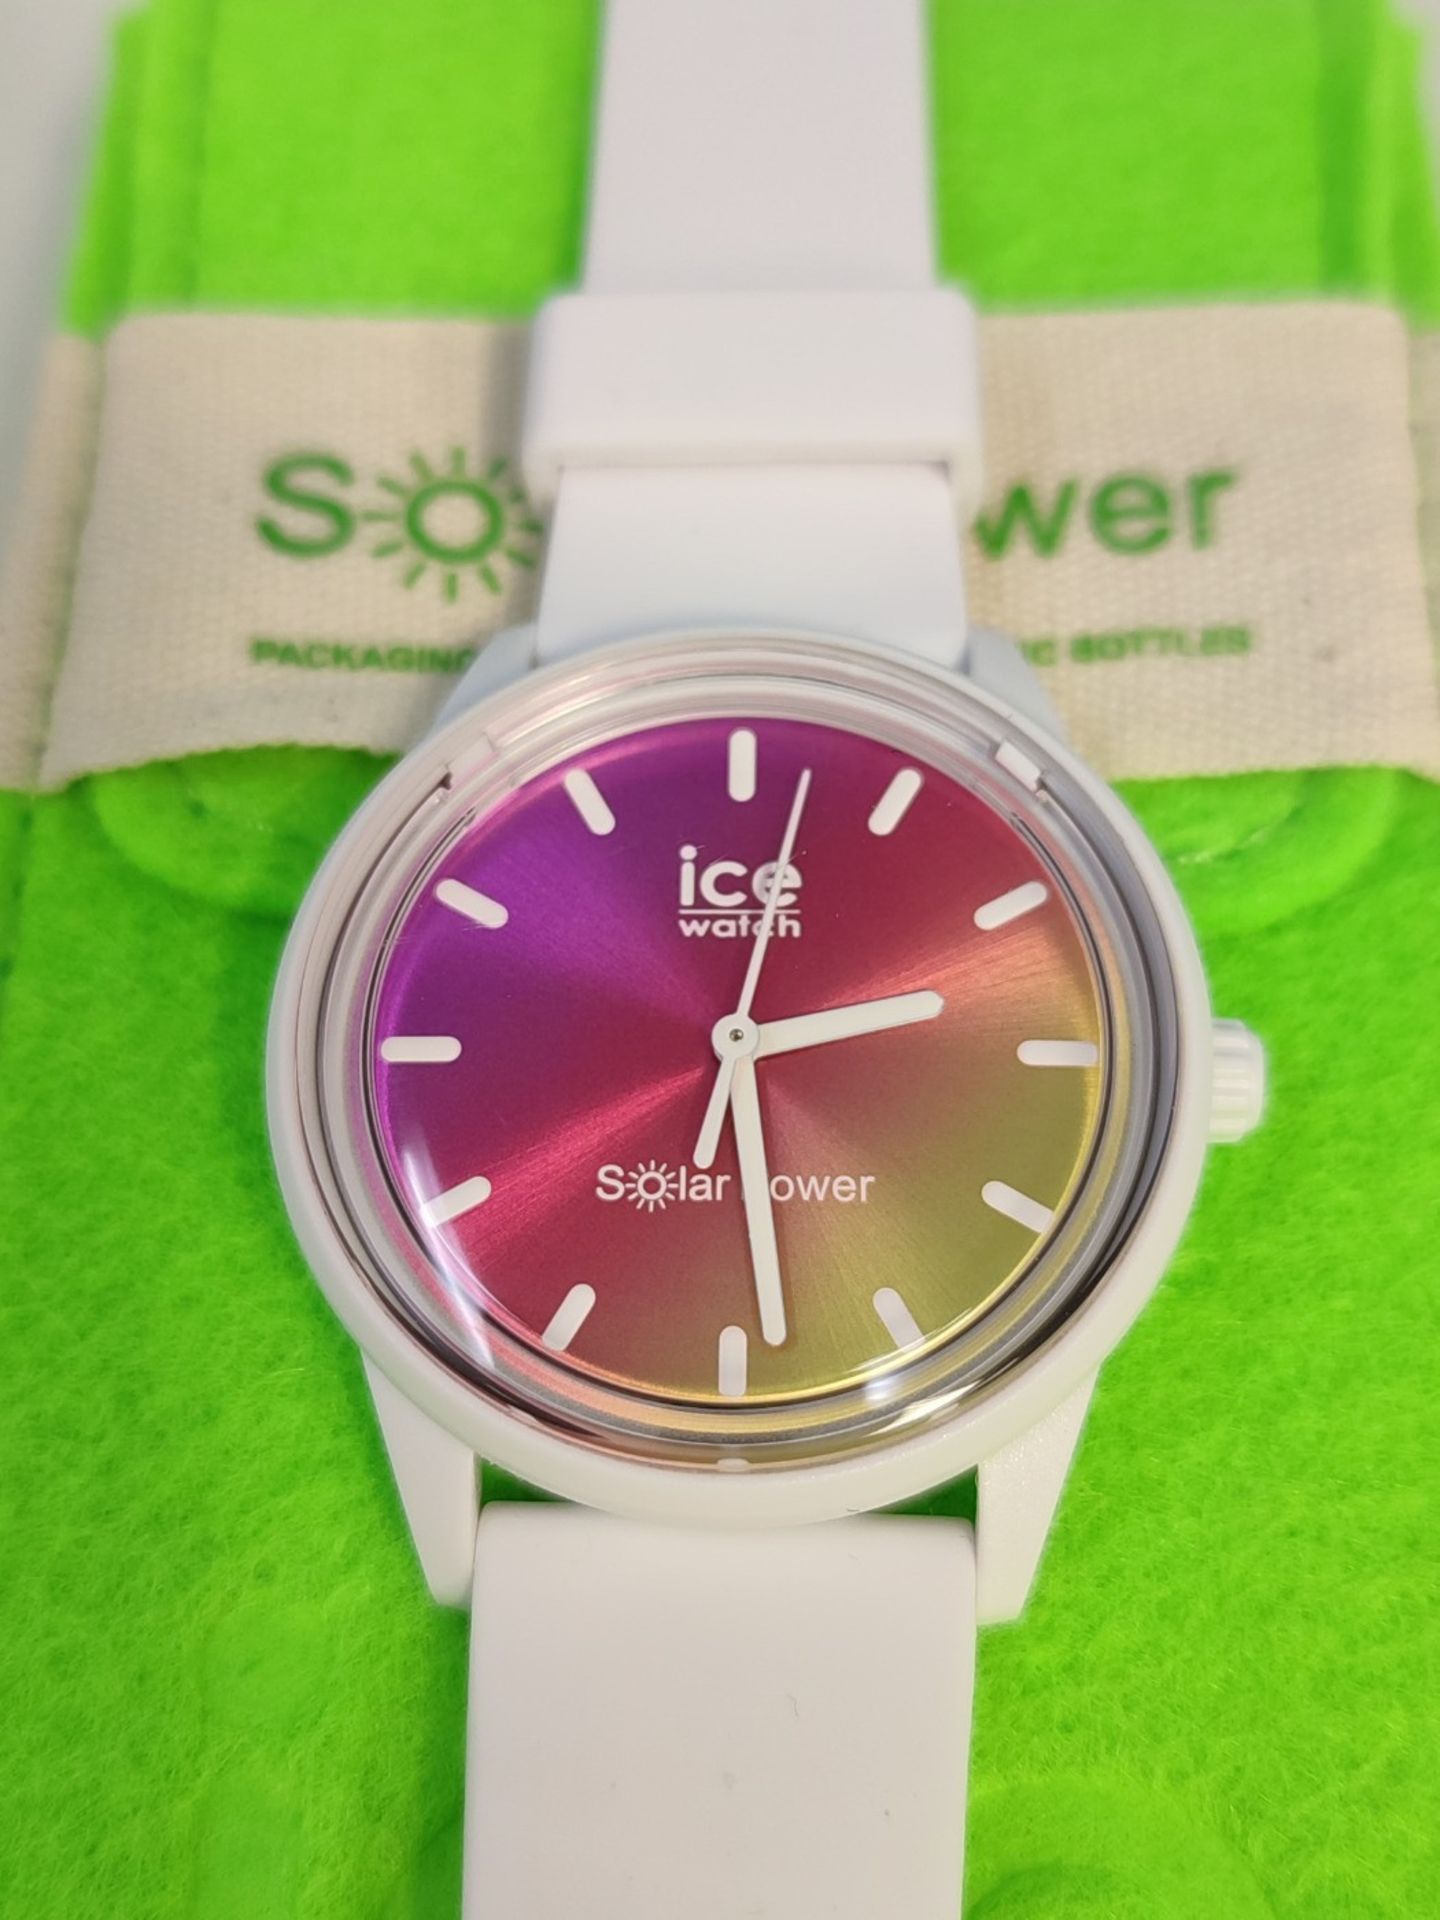 RRP £63.00 Ice-Watch - ICE solar power Sunset California - White women's watch with silicone stra - Image 2 of 3